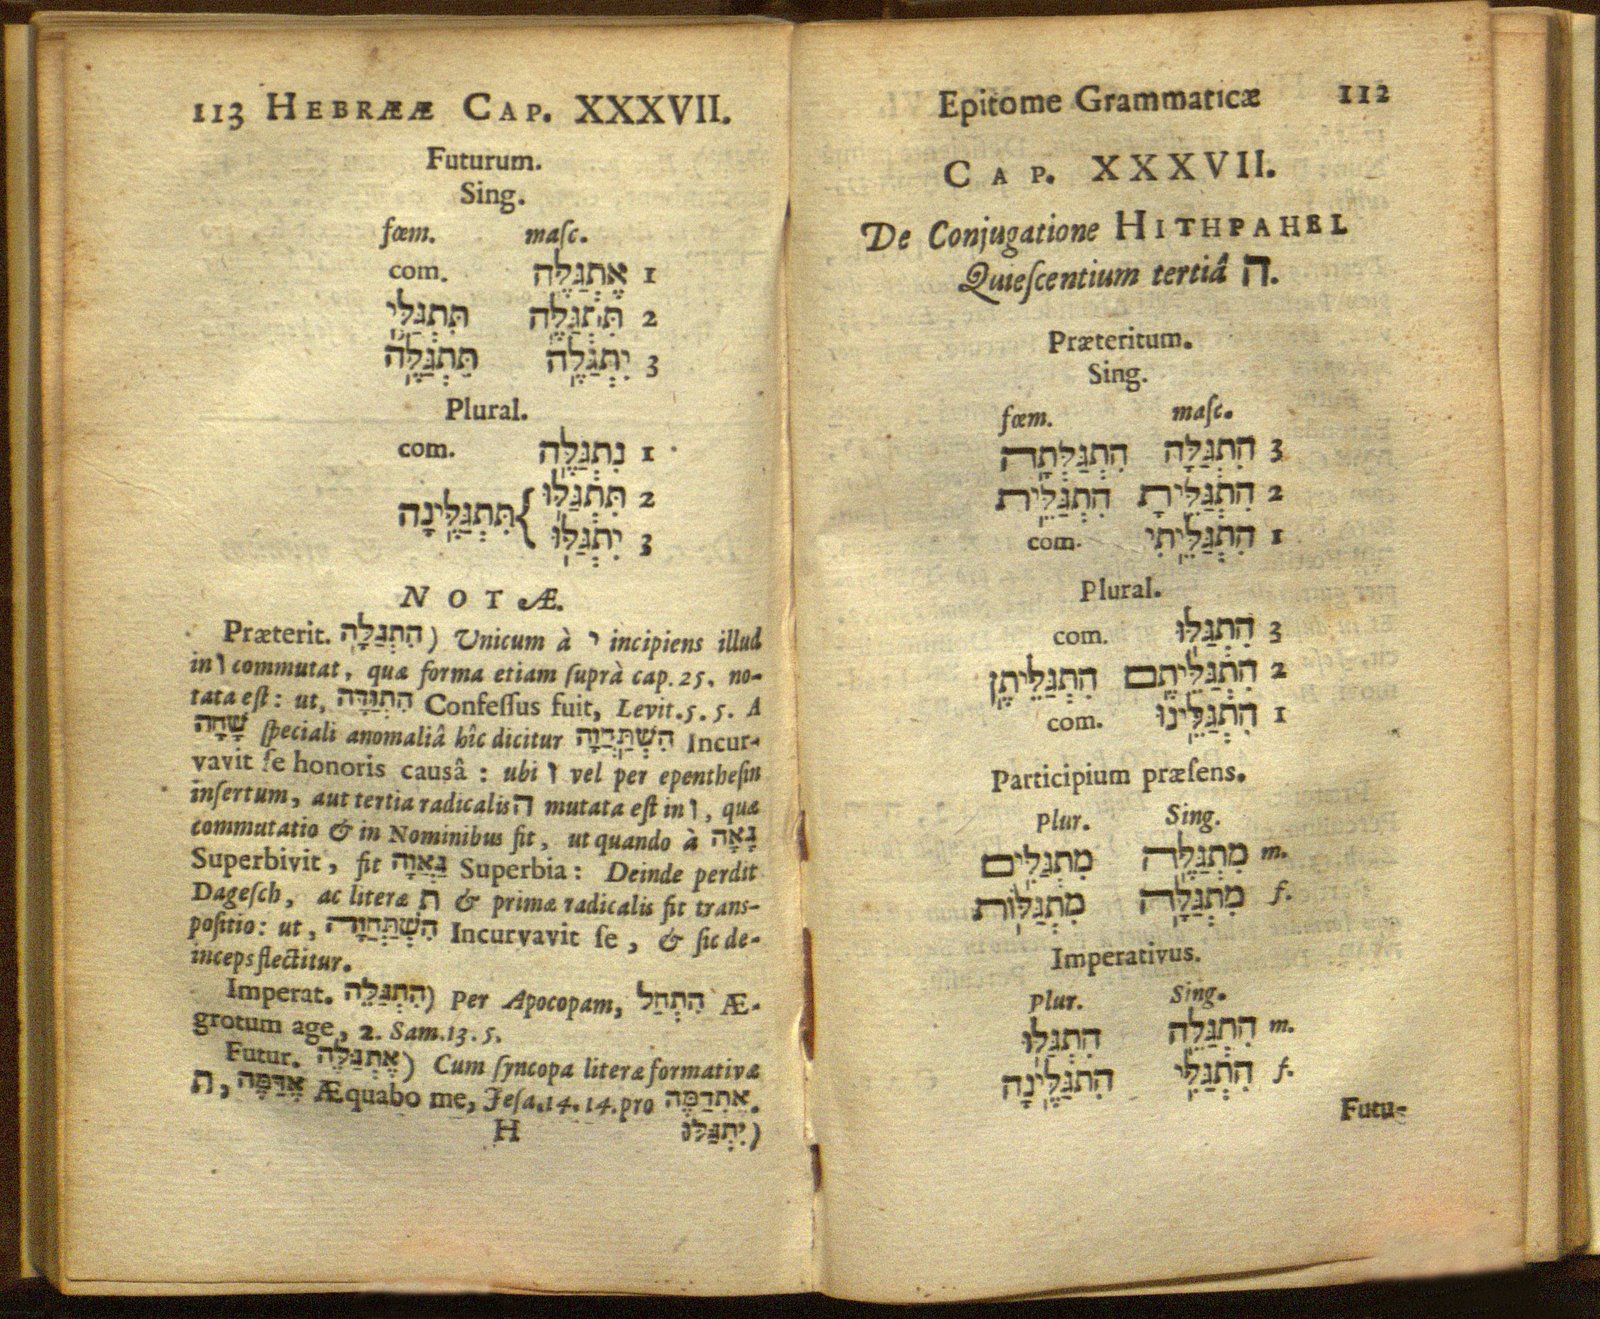 Pages 112 and 113 from Epitome Grammaticus Linguae Sanctae Hebraeae